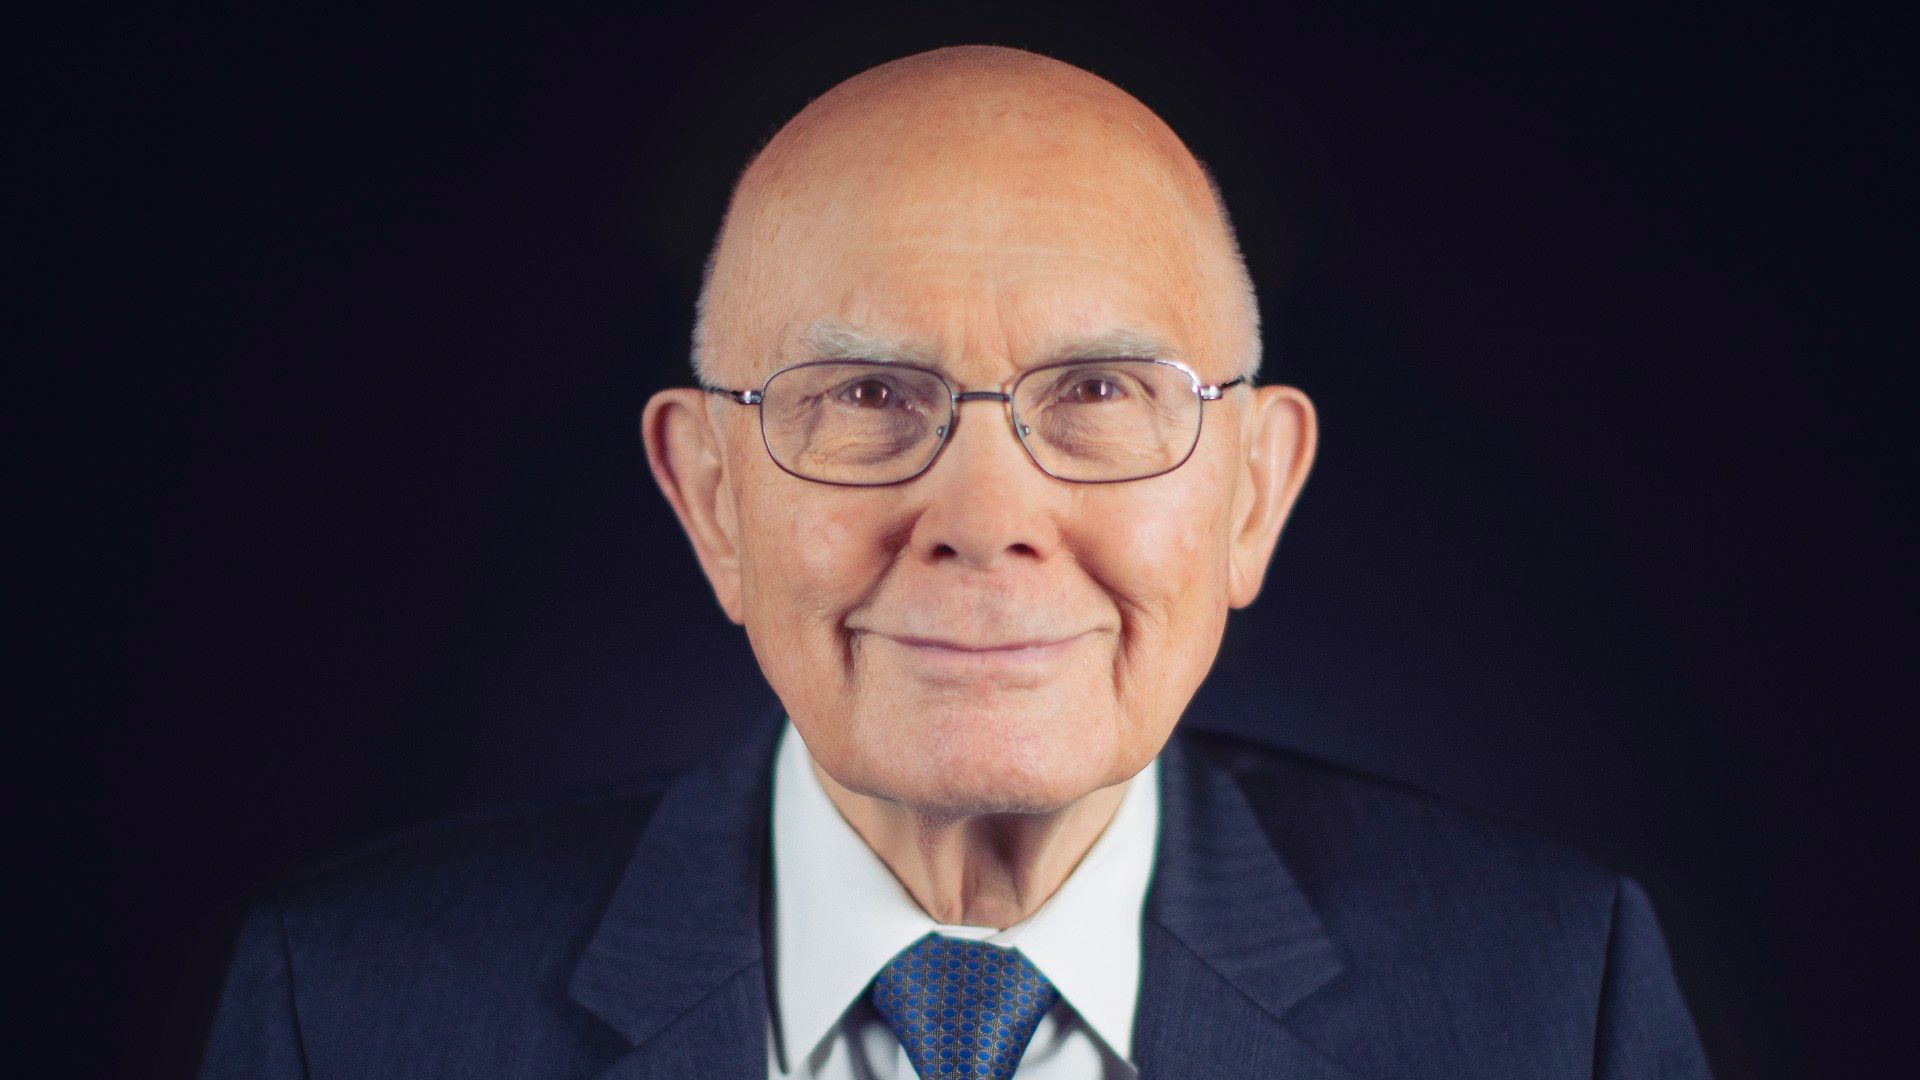 How do you #HearHim? President Dallin H. Oaks says that the Lord can bless us and bless others if we #HearHim.